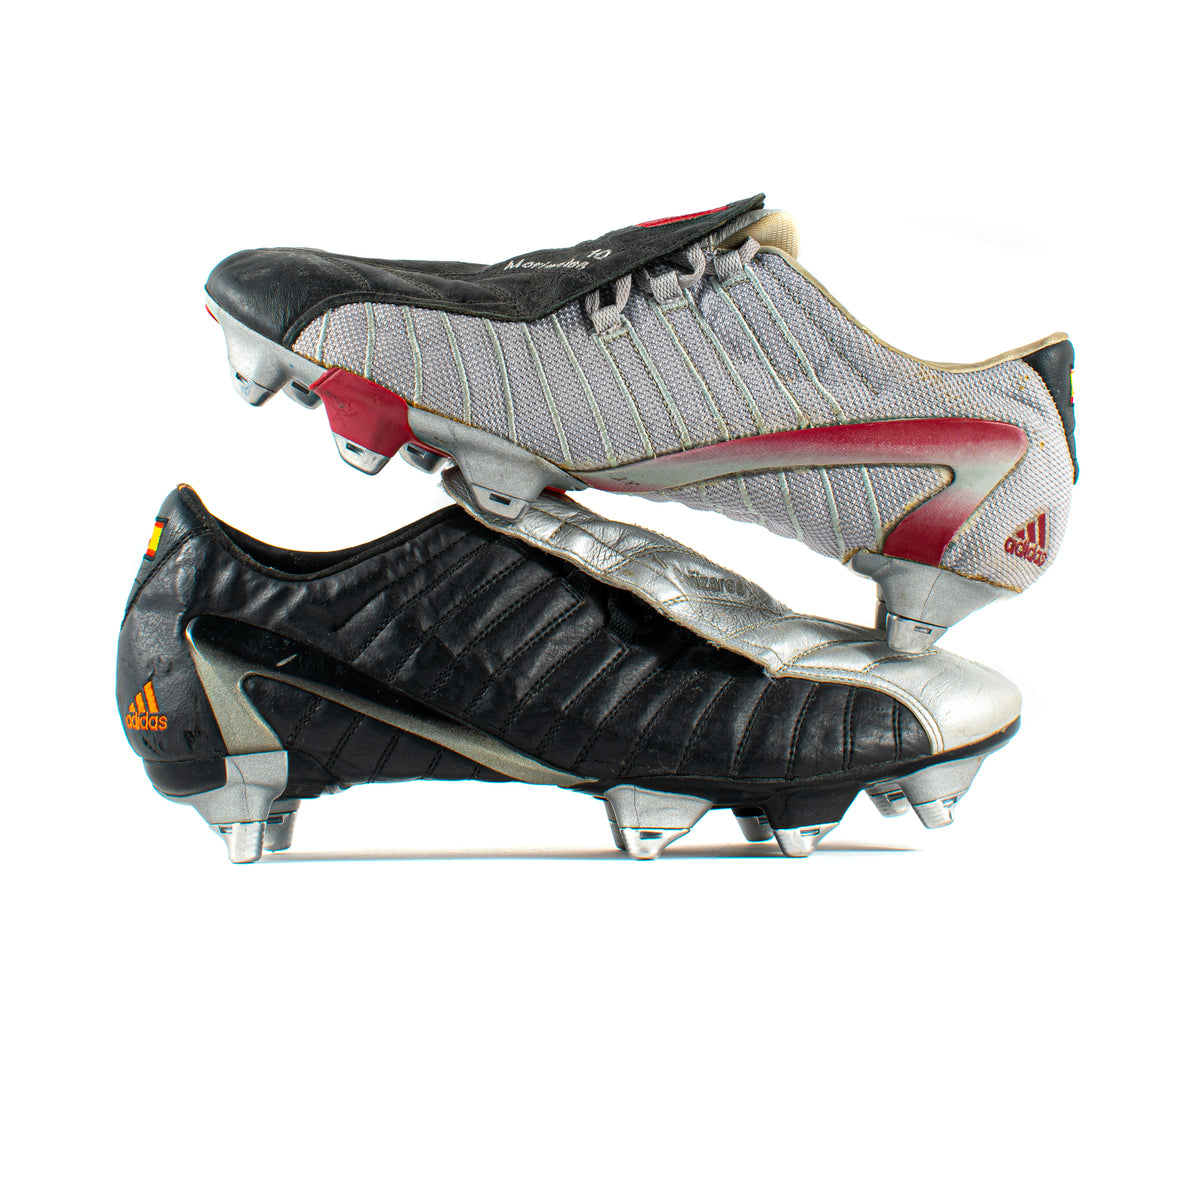 udvikling meget fint Grøn baggrund Adidas F50+ TRX Canizares / Morientes Issued Boots – Classic Soccer Cleats